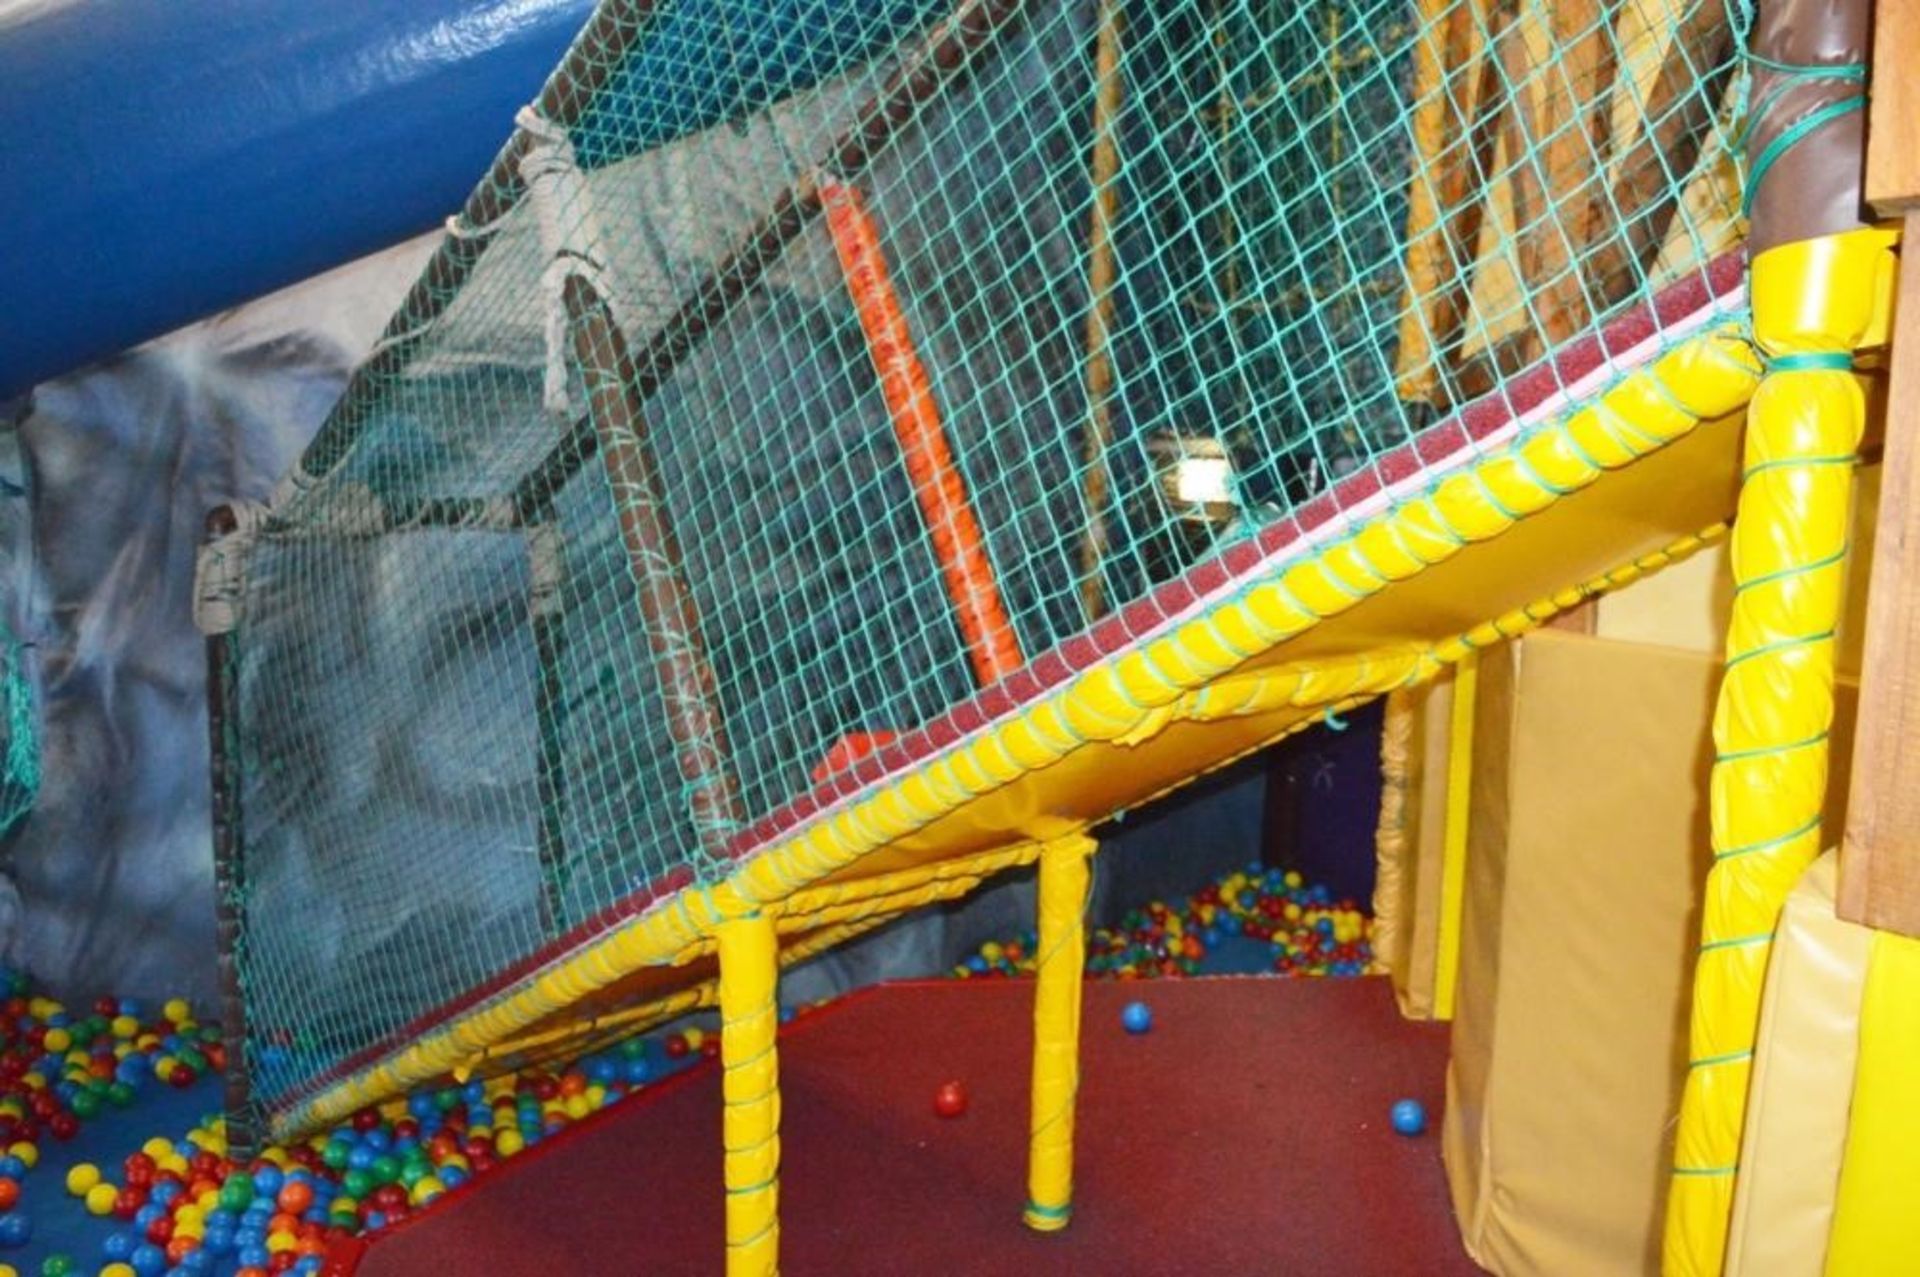 Botany Bay Puddletown Pirates Play Centre - The Only Pirate Themed Play Centre in the North West - F - Image 24 of 30